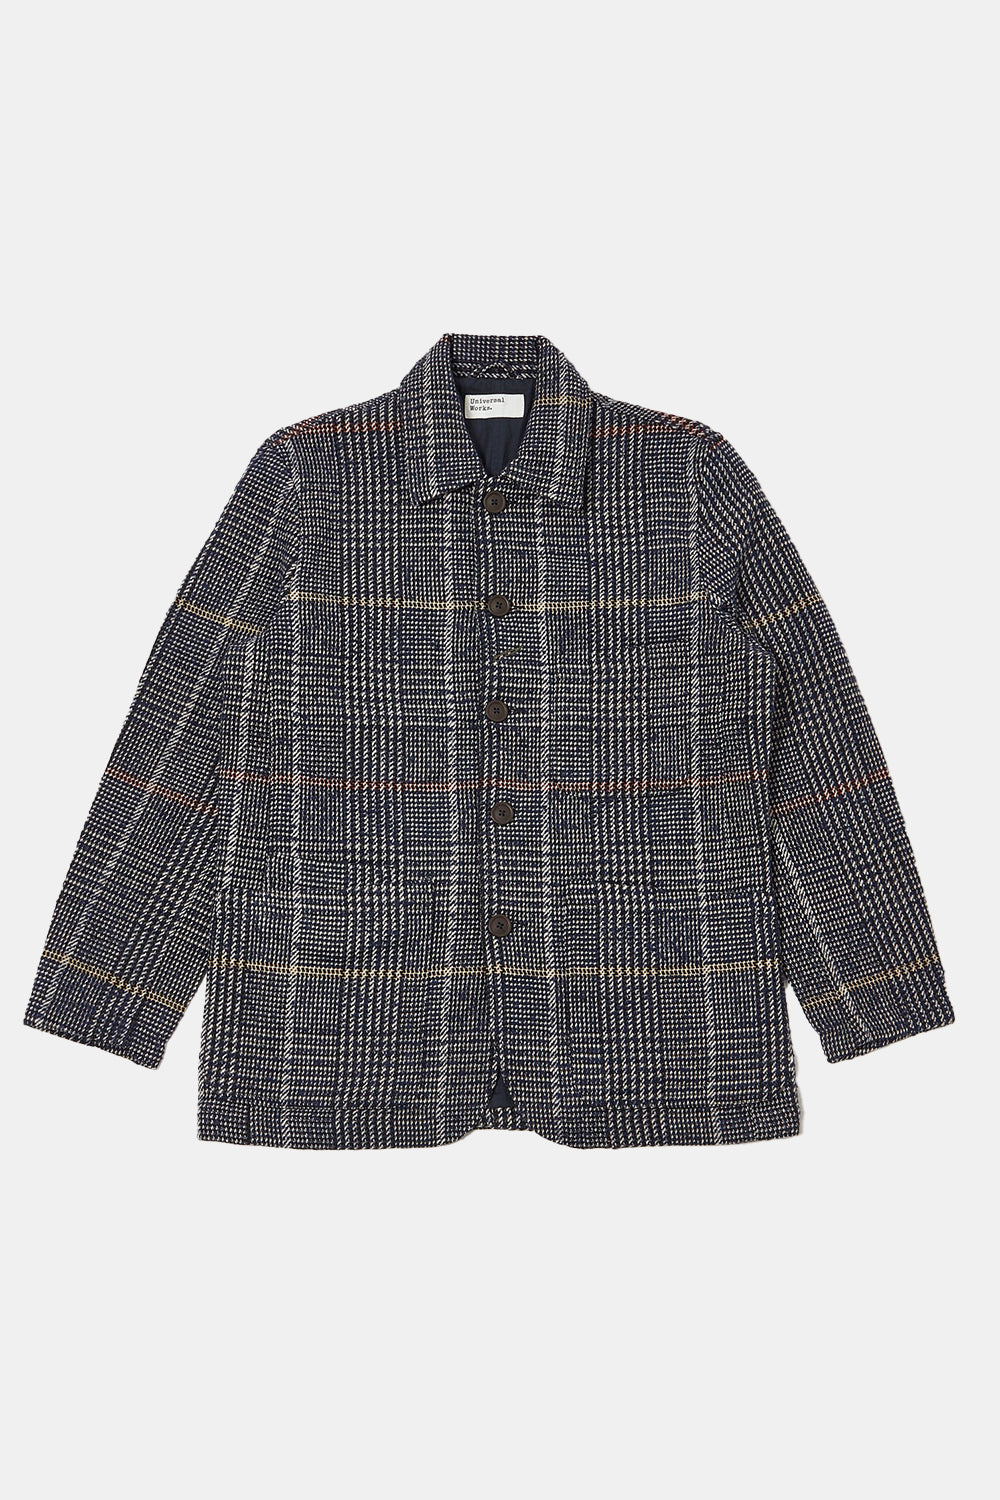 Universal Works Long Sleeved Utility Shirt (Navy Dogtooth Check)